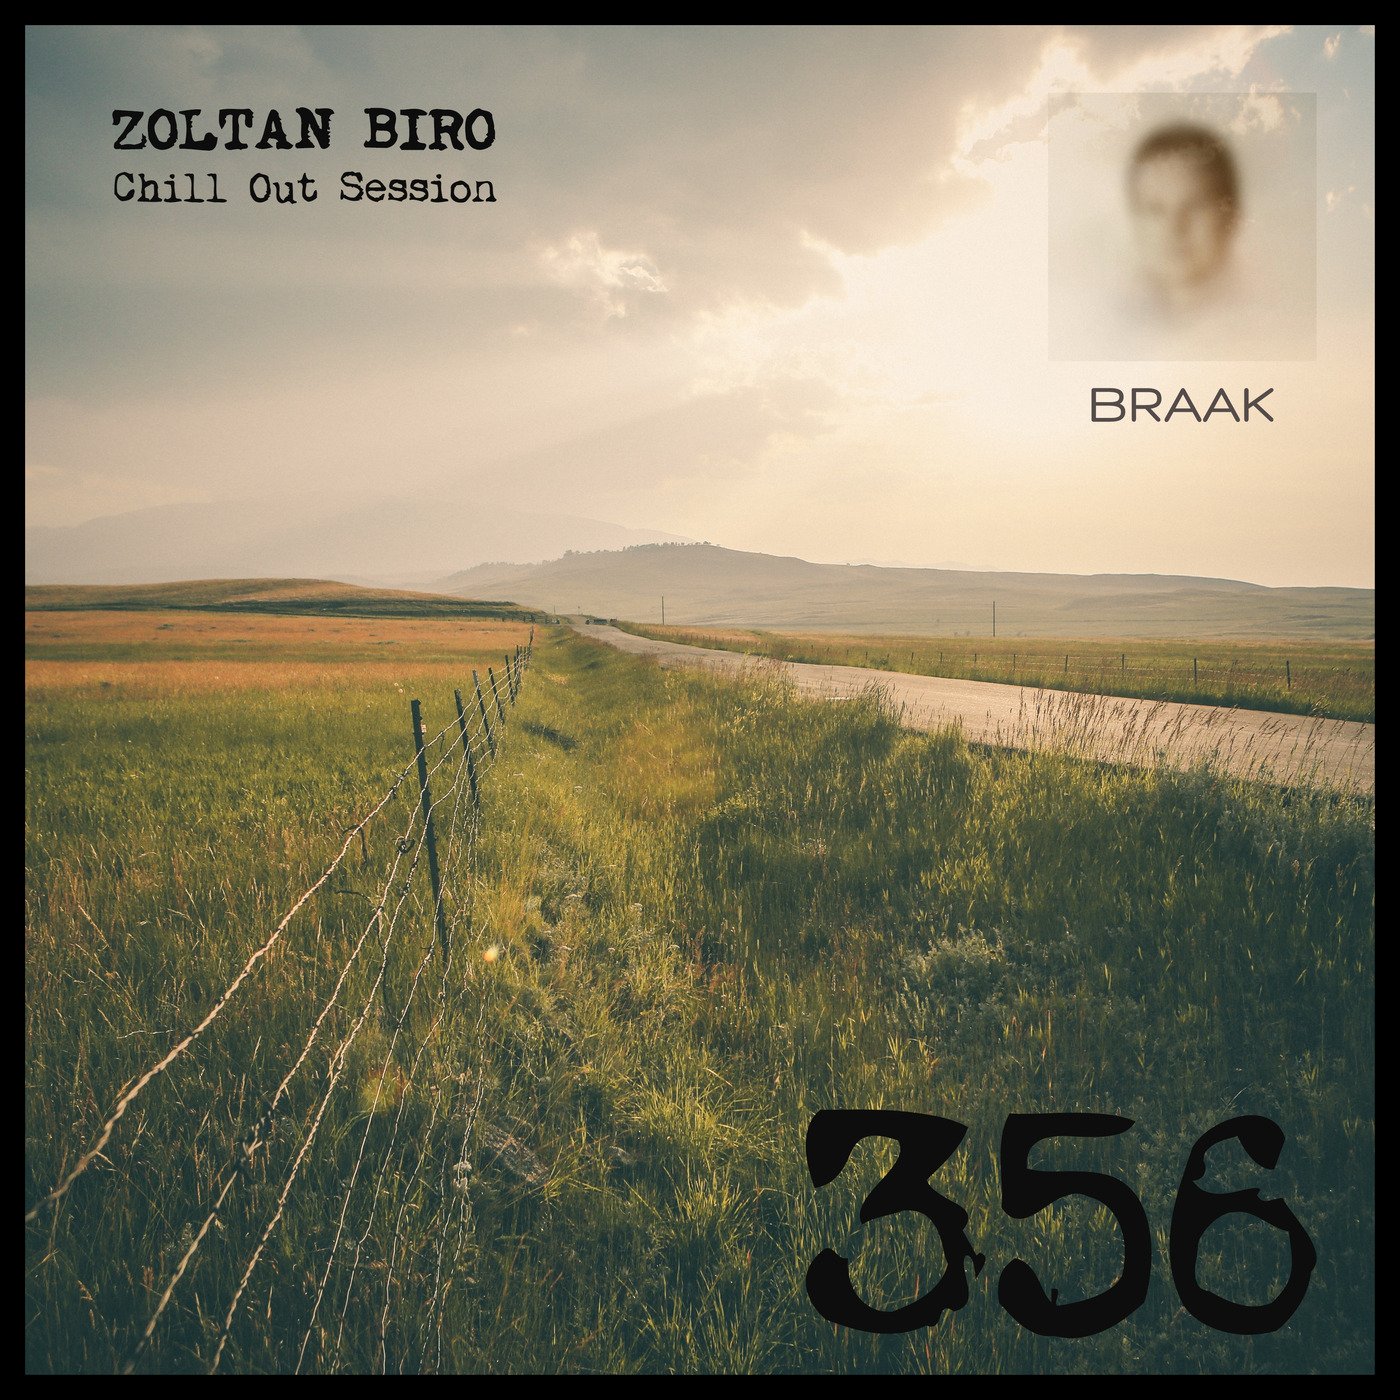 Zoltan Biro - Chill Out Session 356 [including: Braak Special Mix]